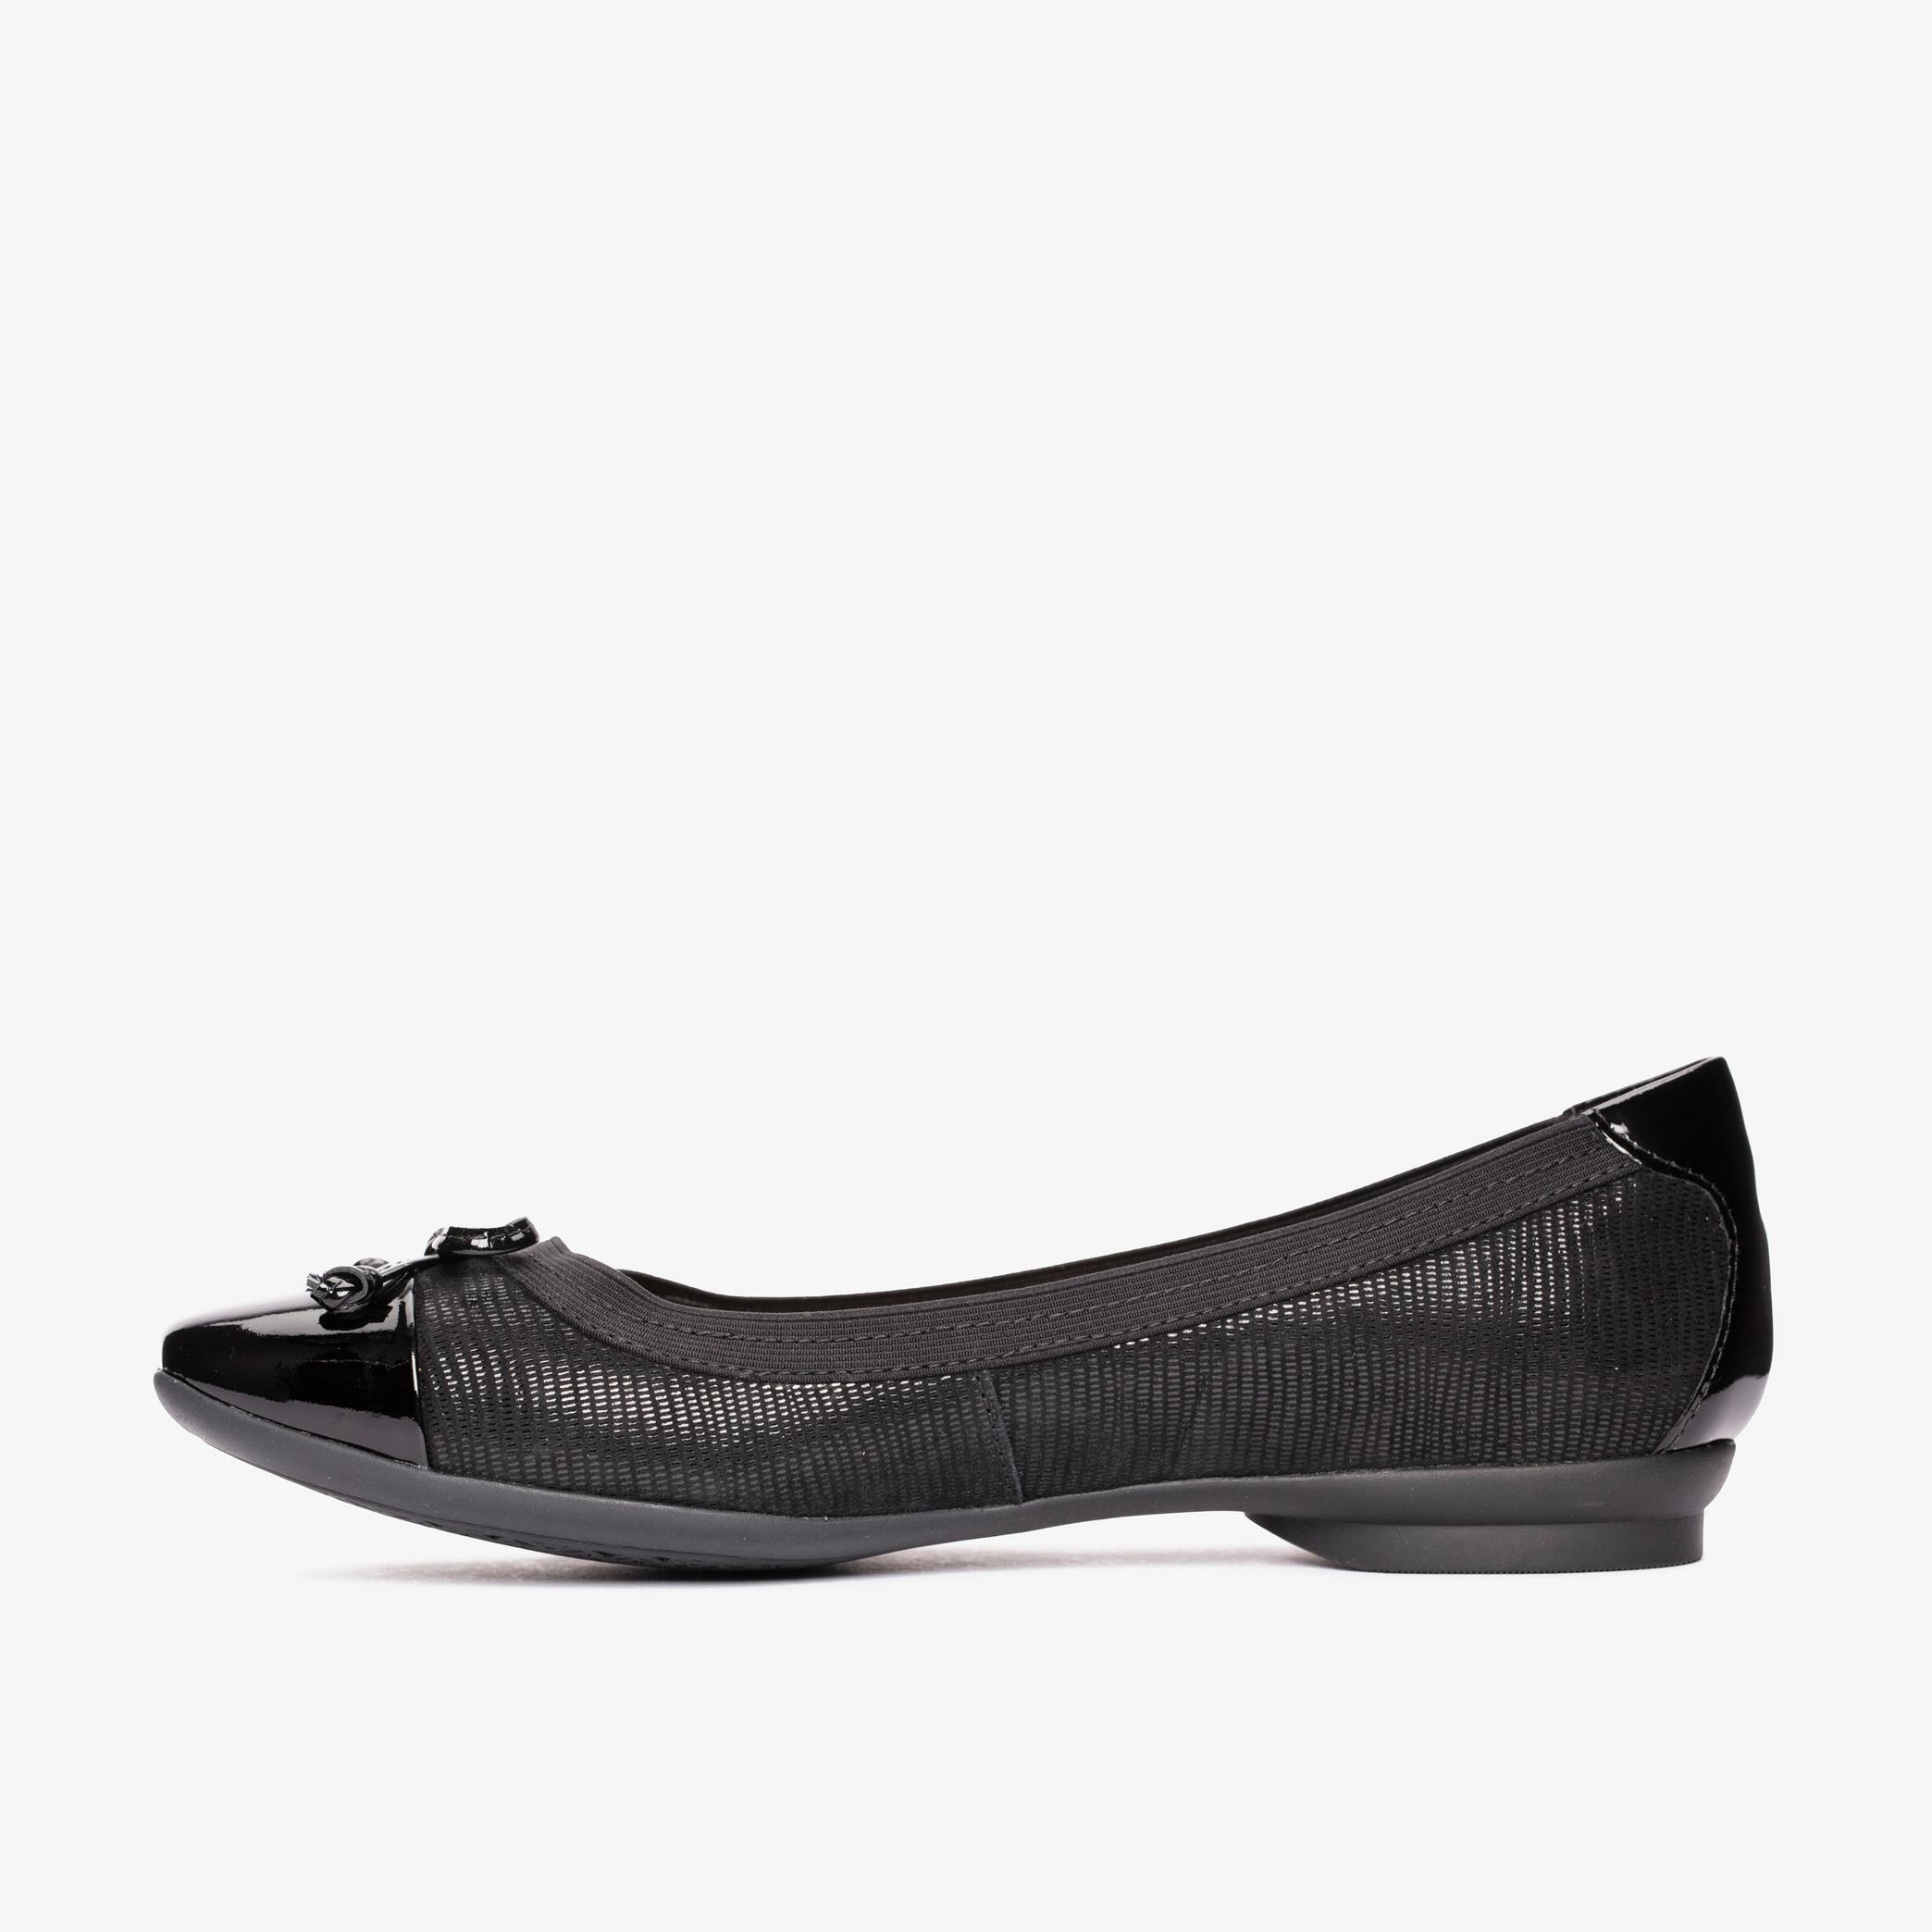 Candra Glow Black Suede Slip Ons, view 2 of 6